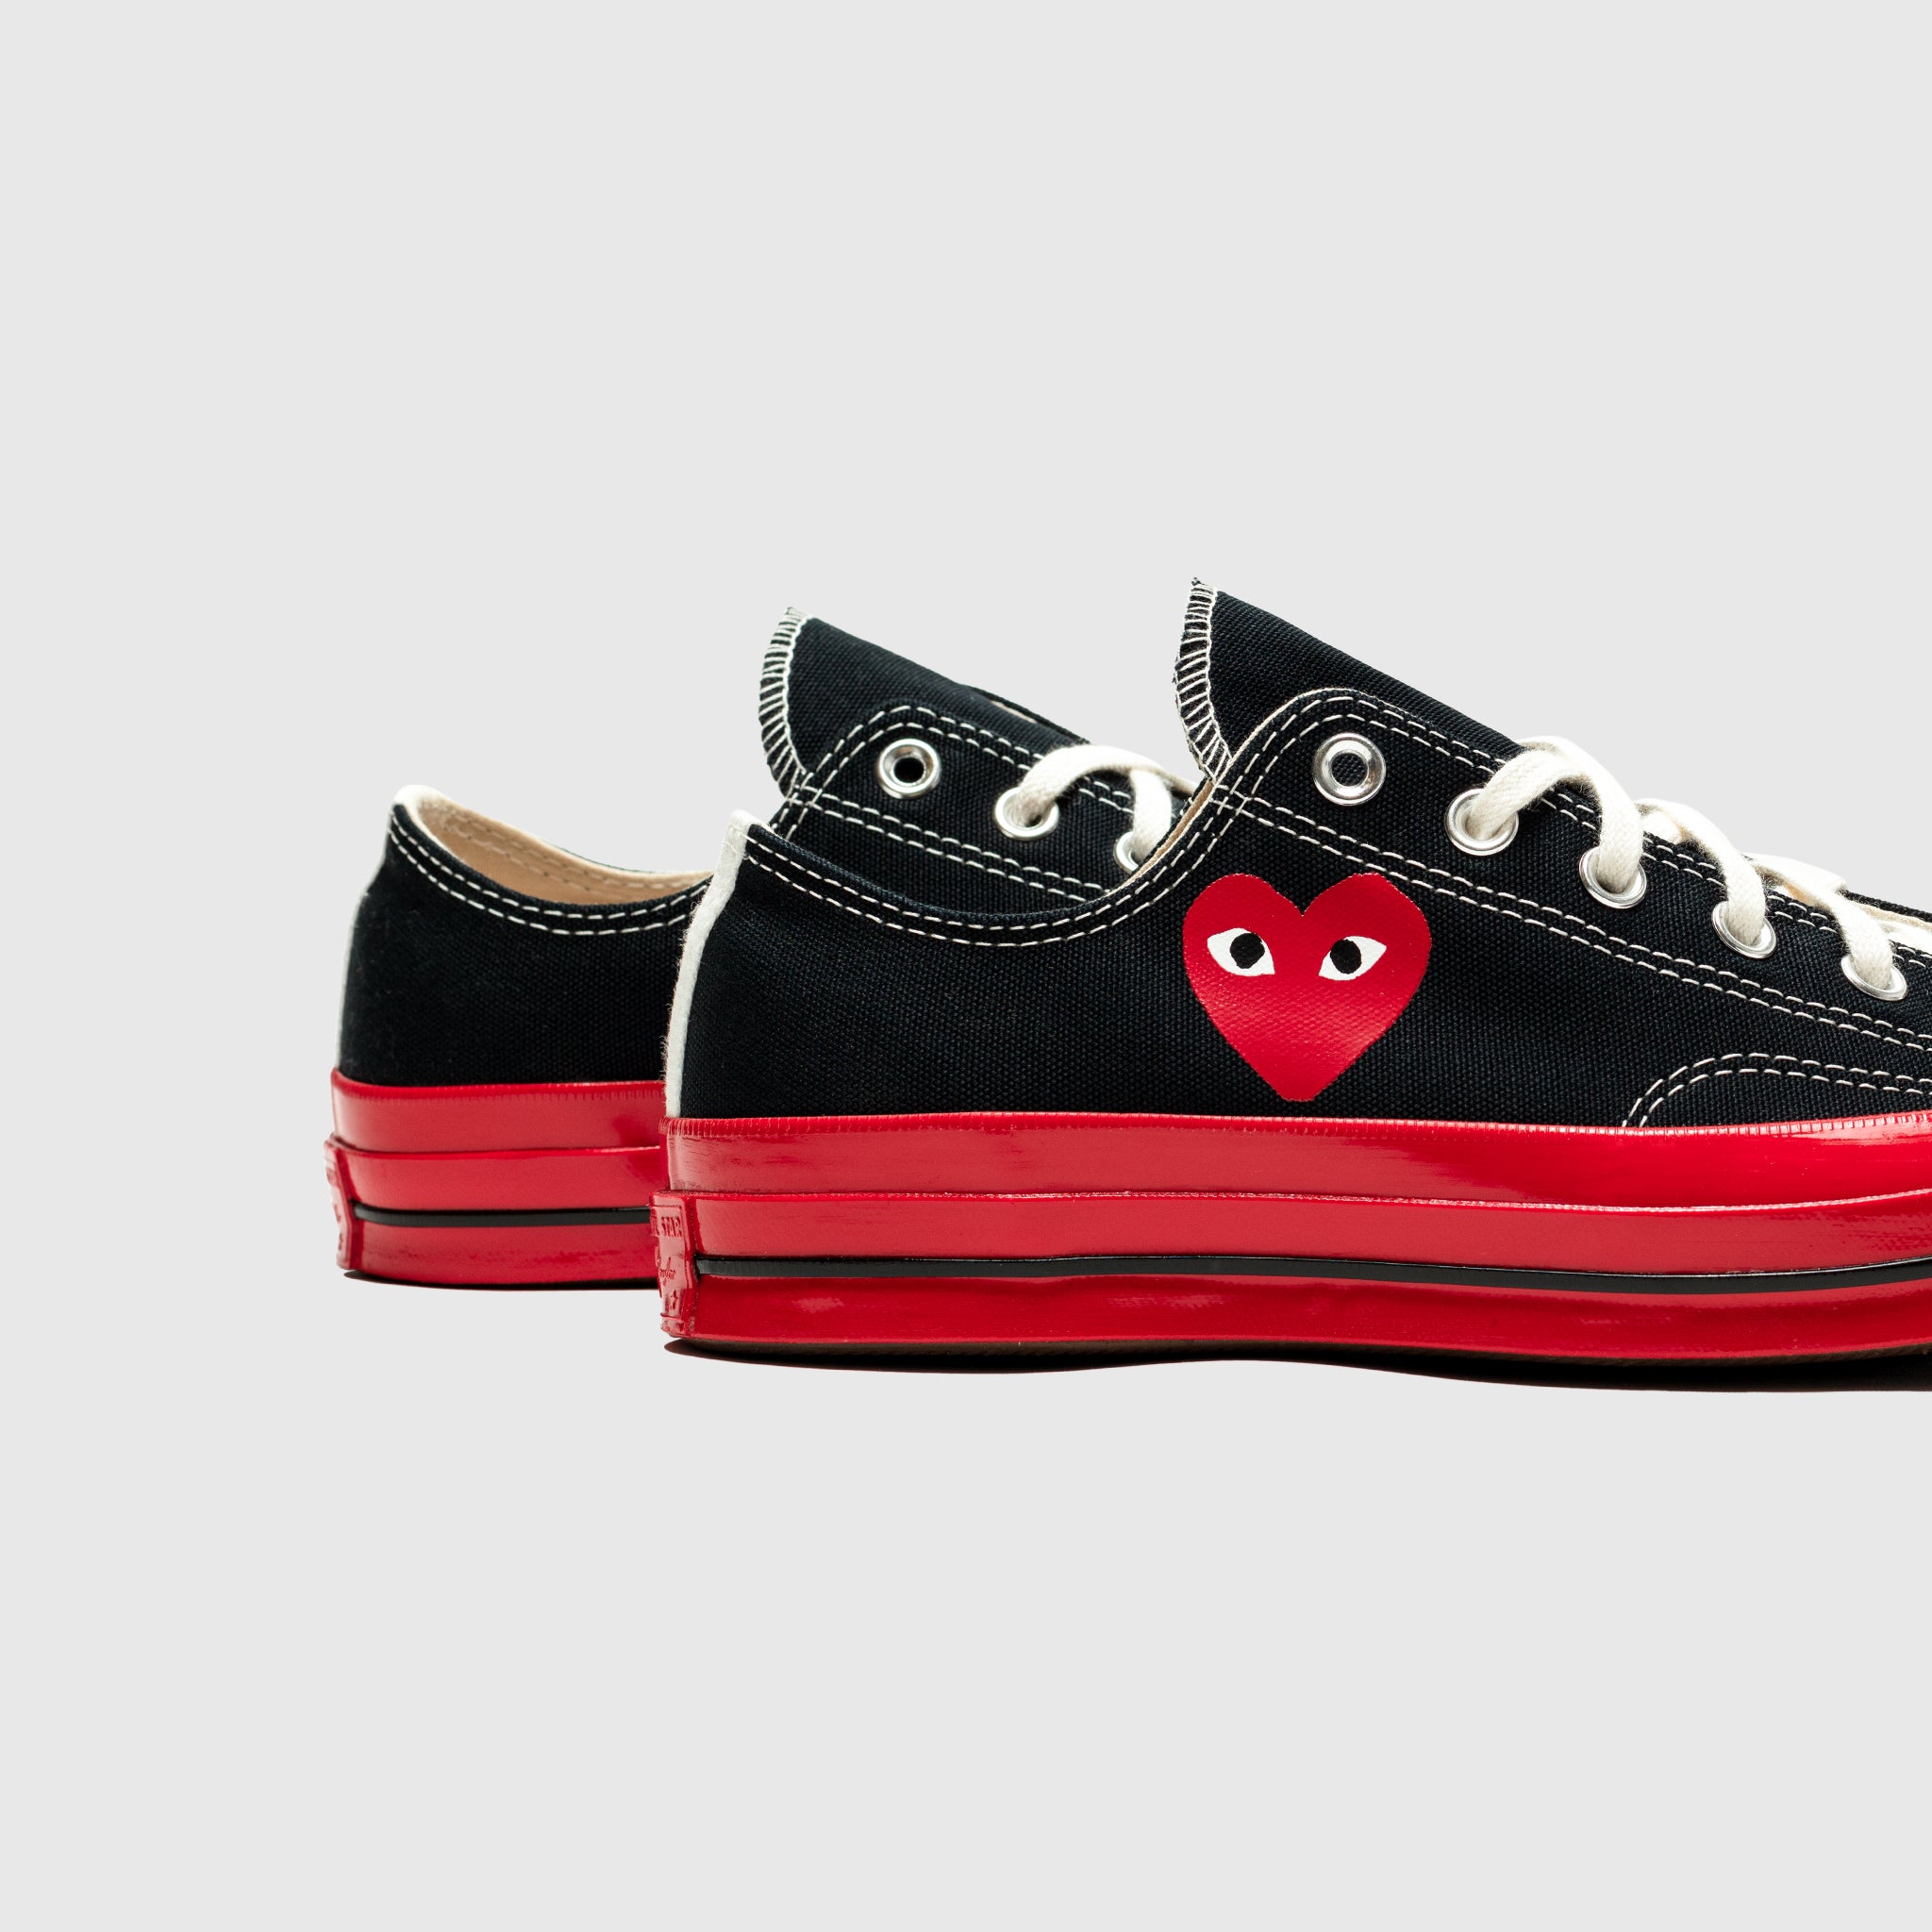 Low 'Chuck Taylor' Red Sole Black